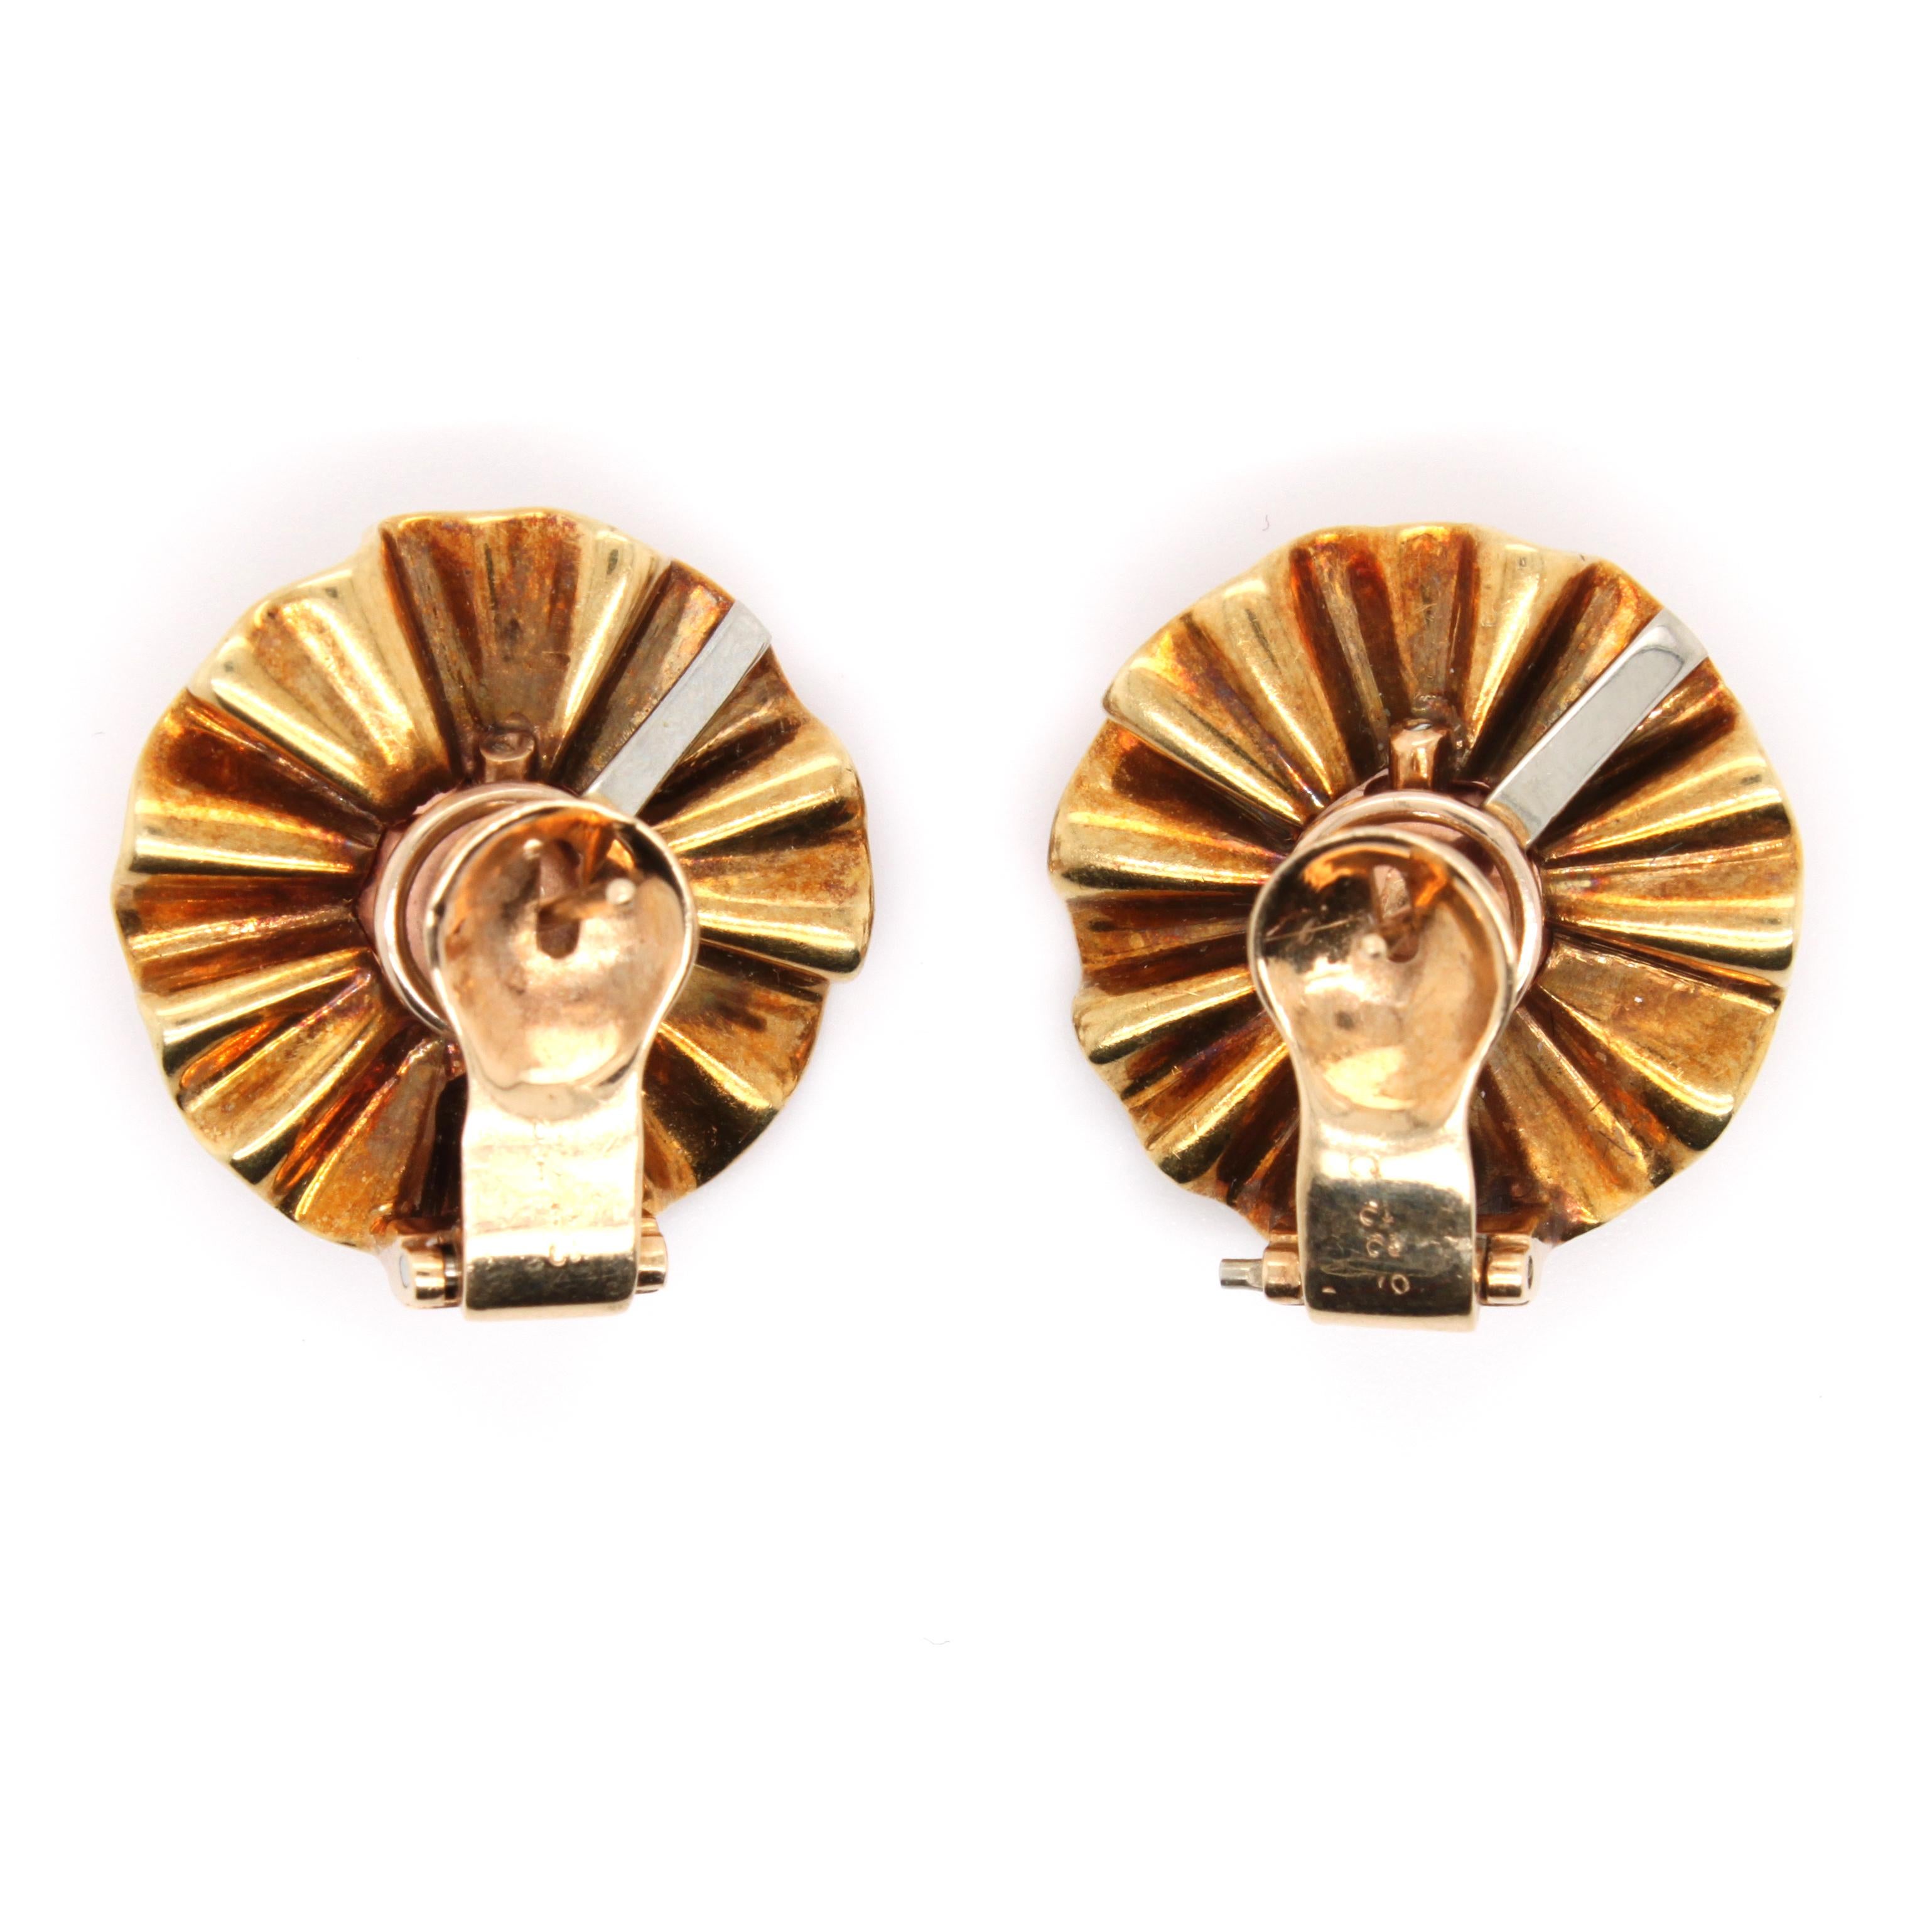 Women's Mauboussin Trabert & Hoeffer Reflection Gold Earclips and Brooch Set circa 1940s For Sale